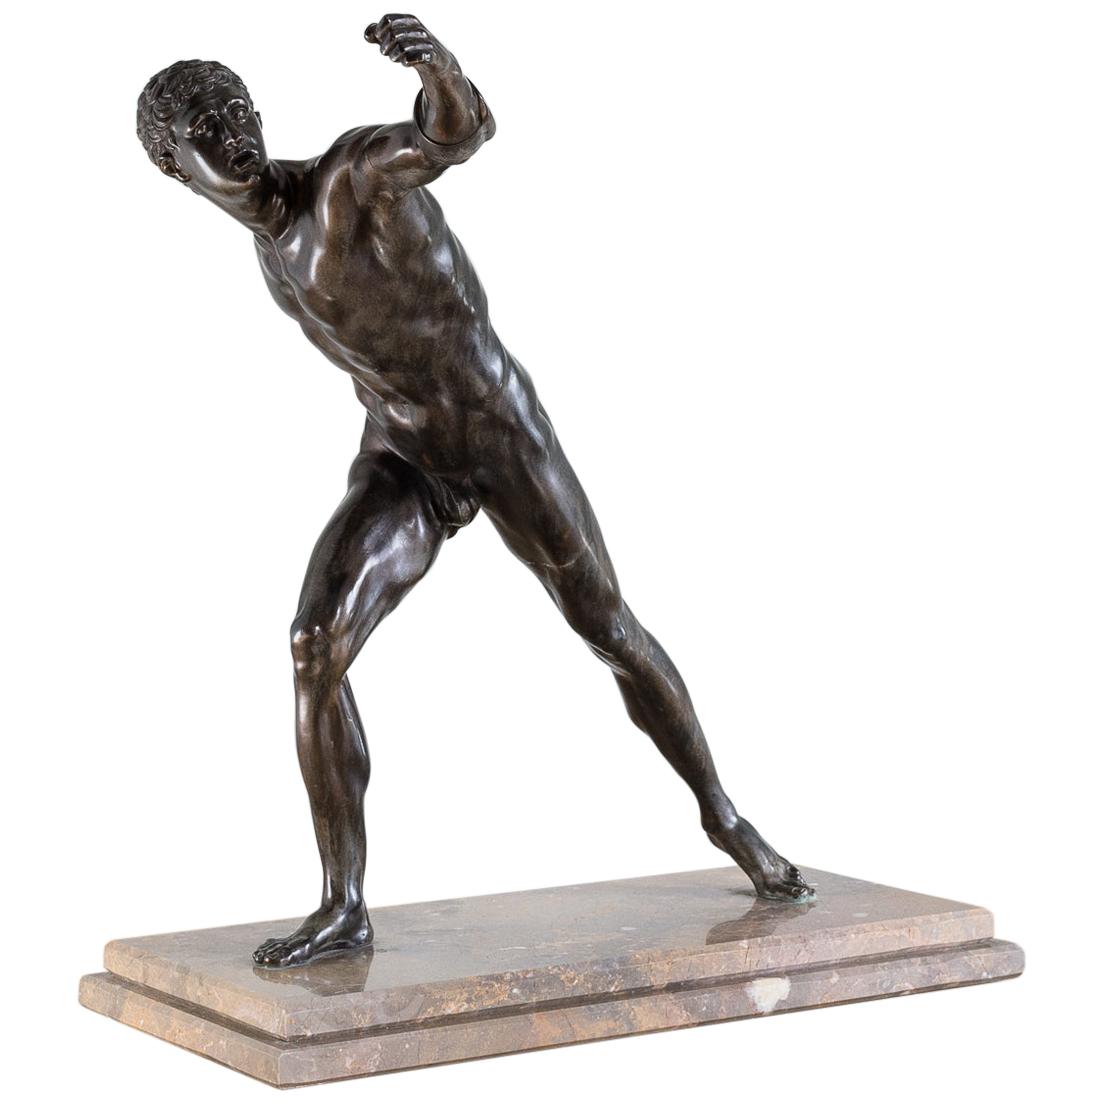 19th Century Bronze Sculpture of the Borghese Gladiator